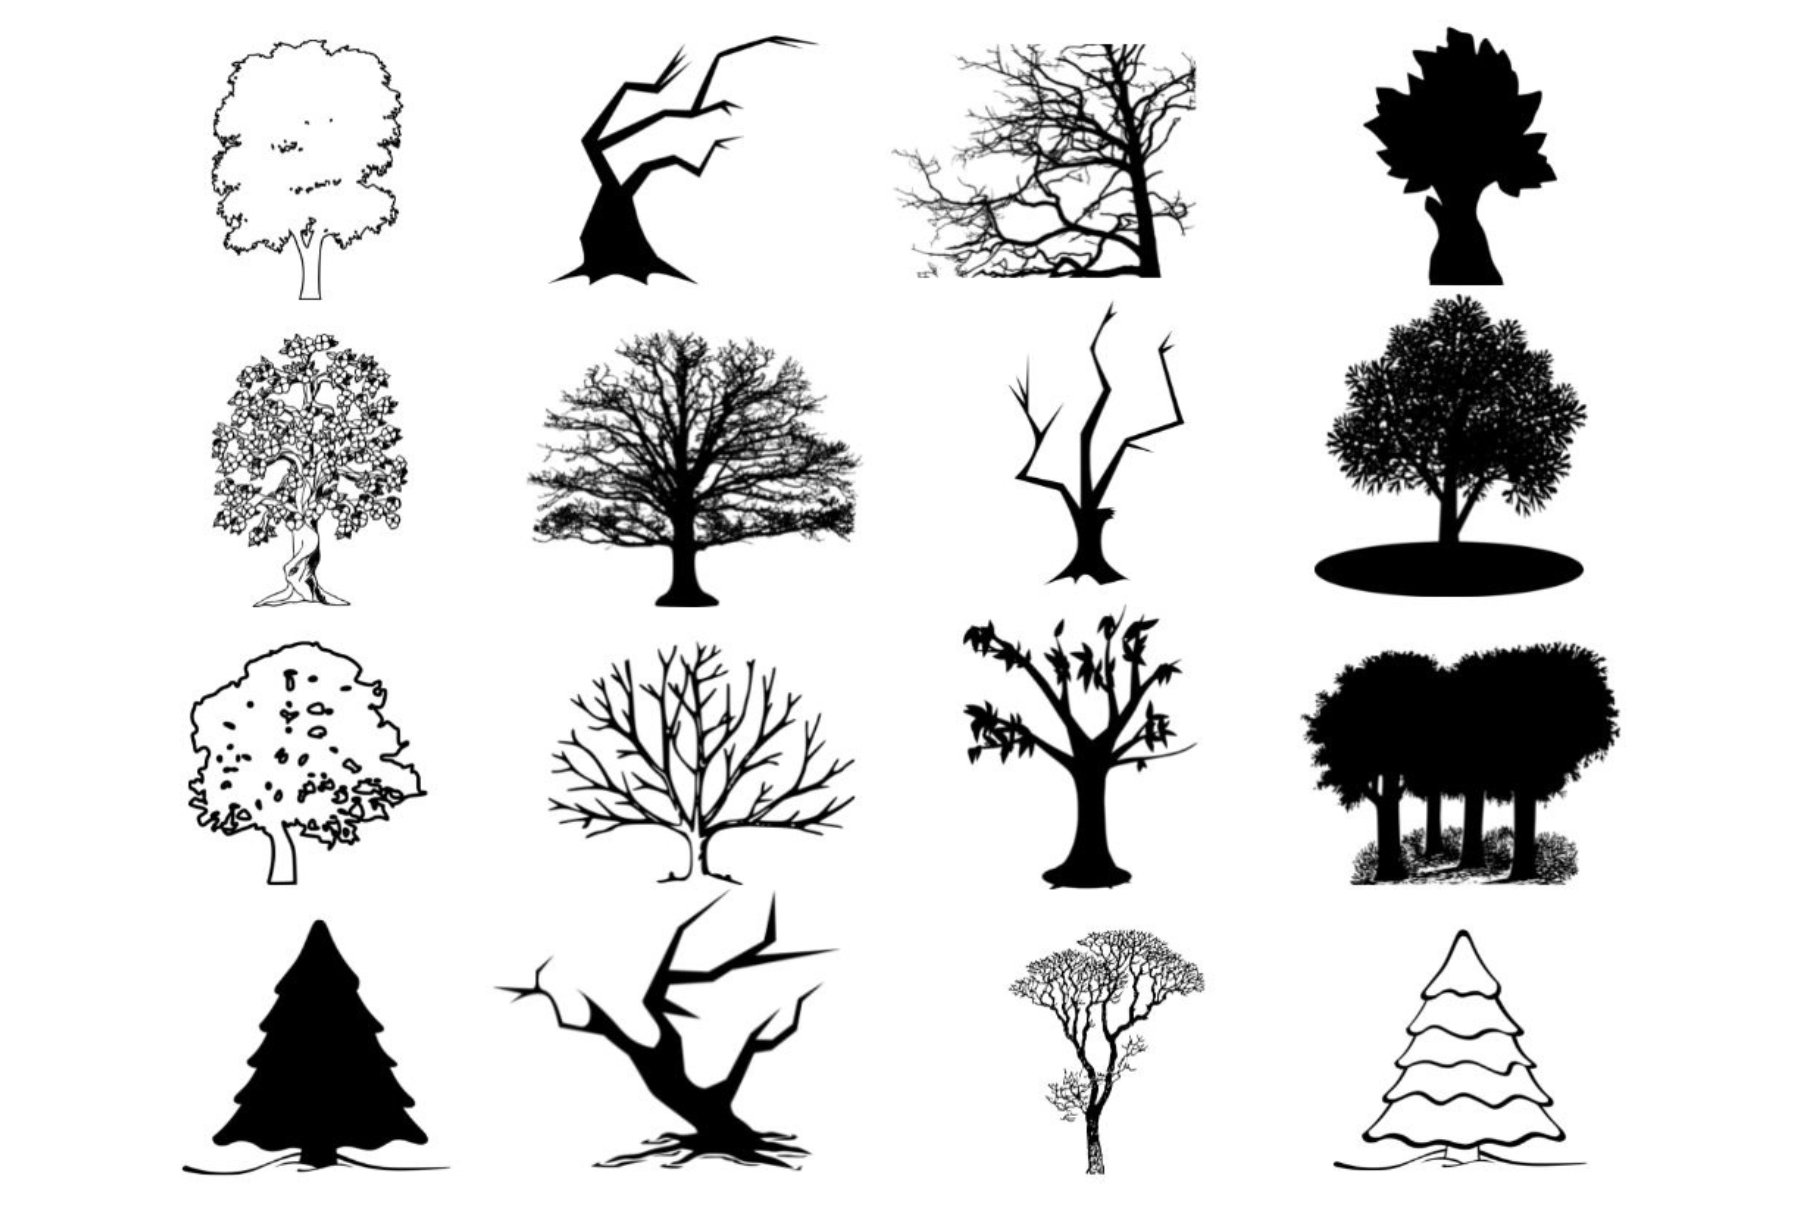 Tree Silhouette cover image.